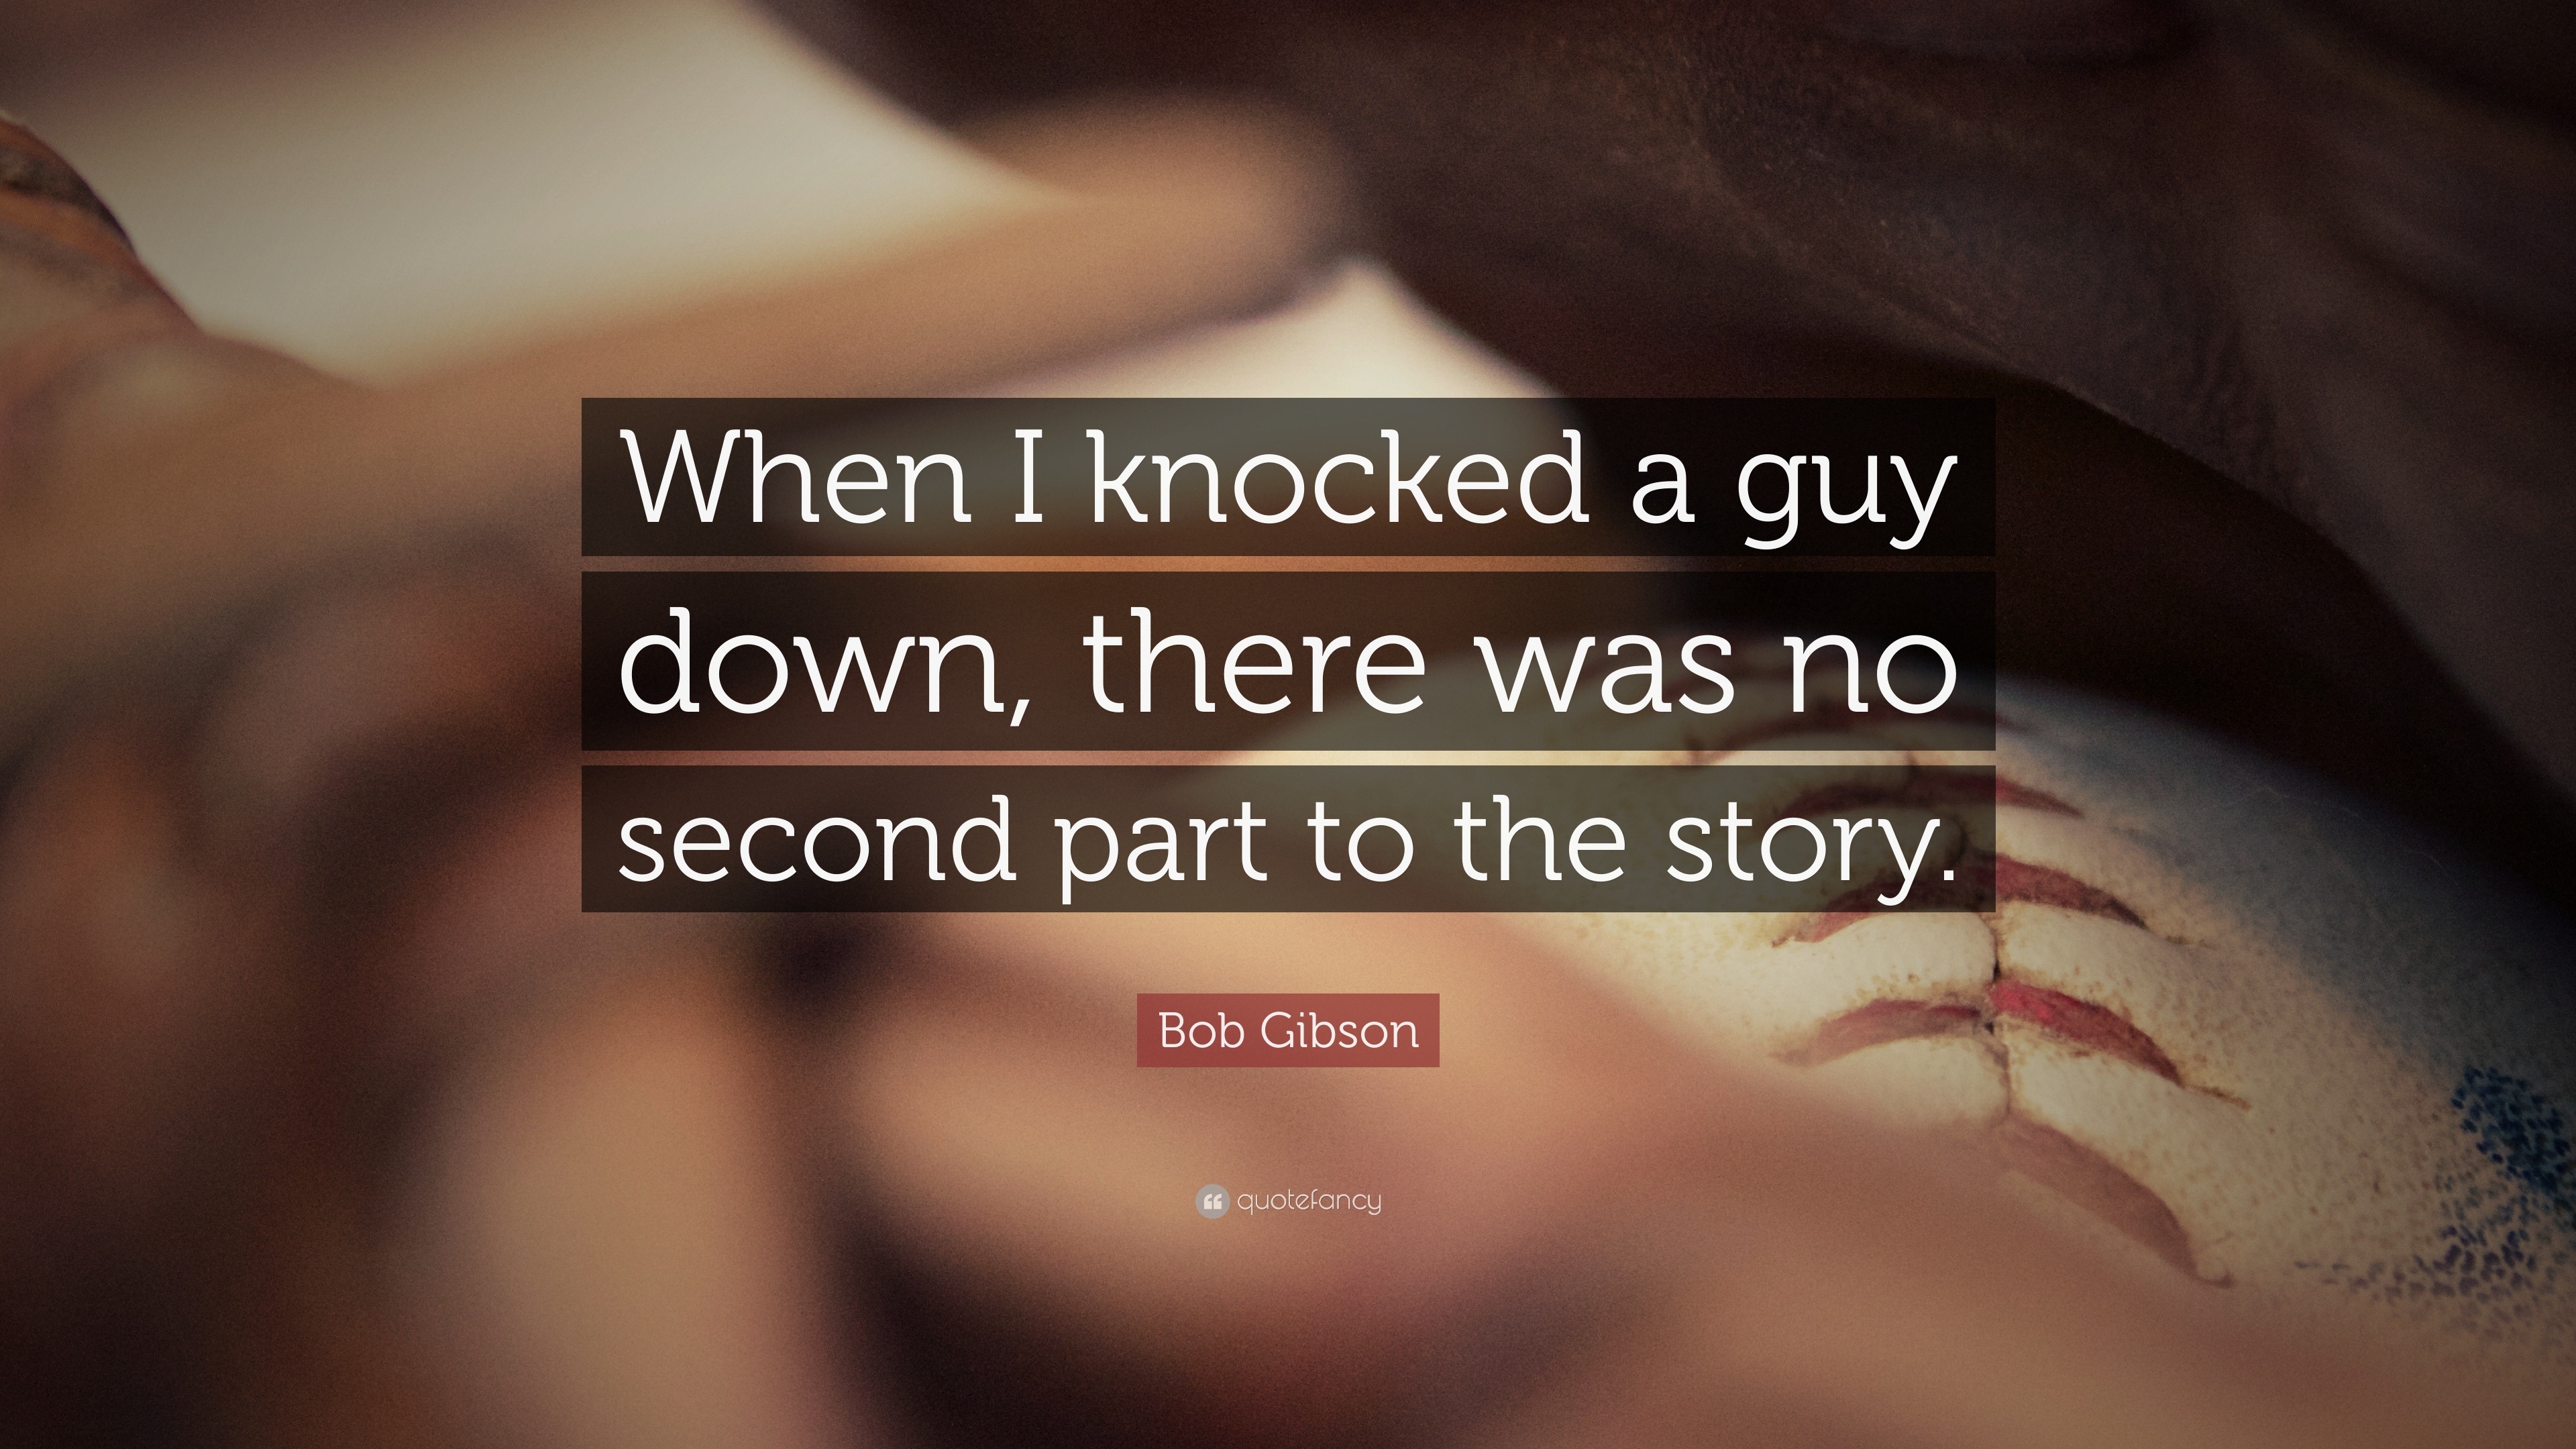 When I knocked a guy down, there was no second part to the story. 